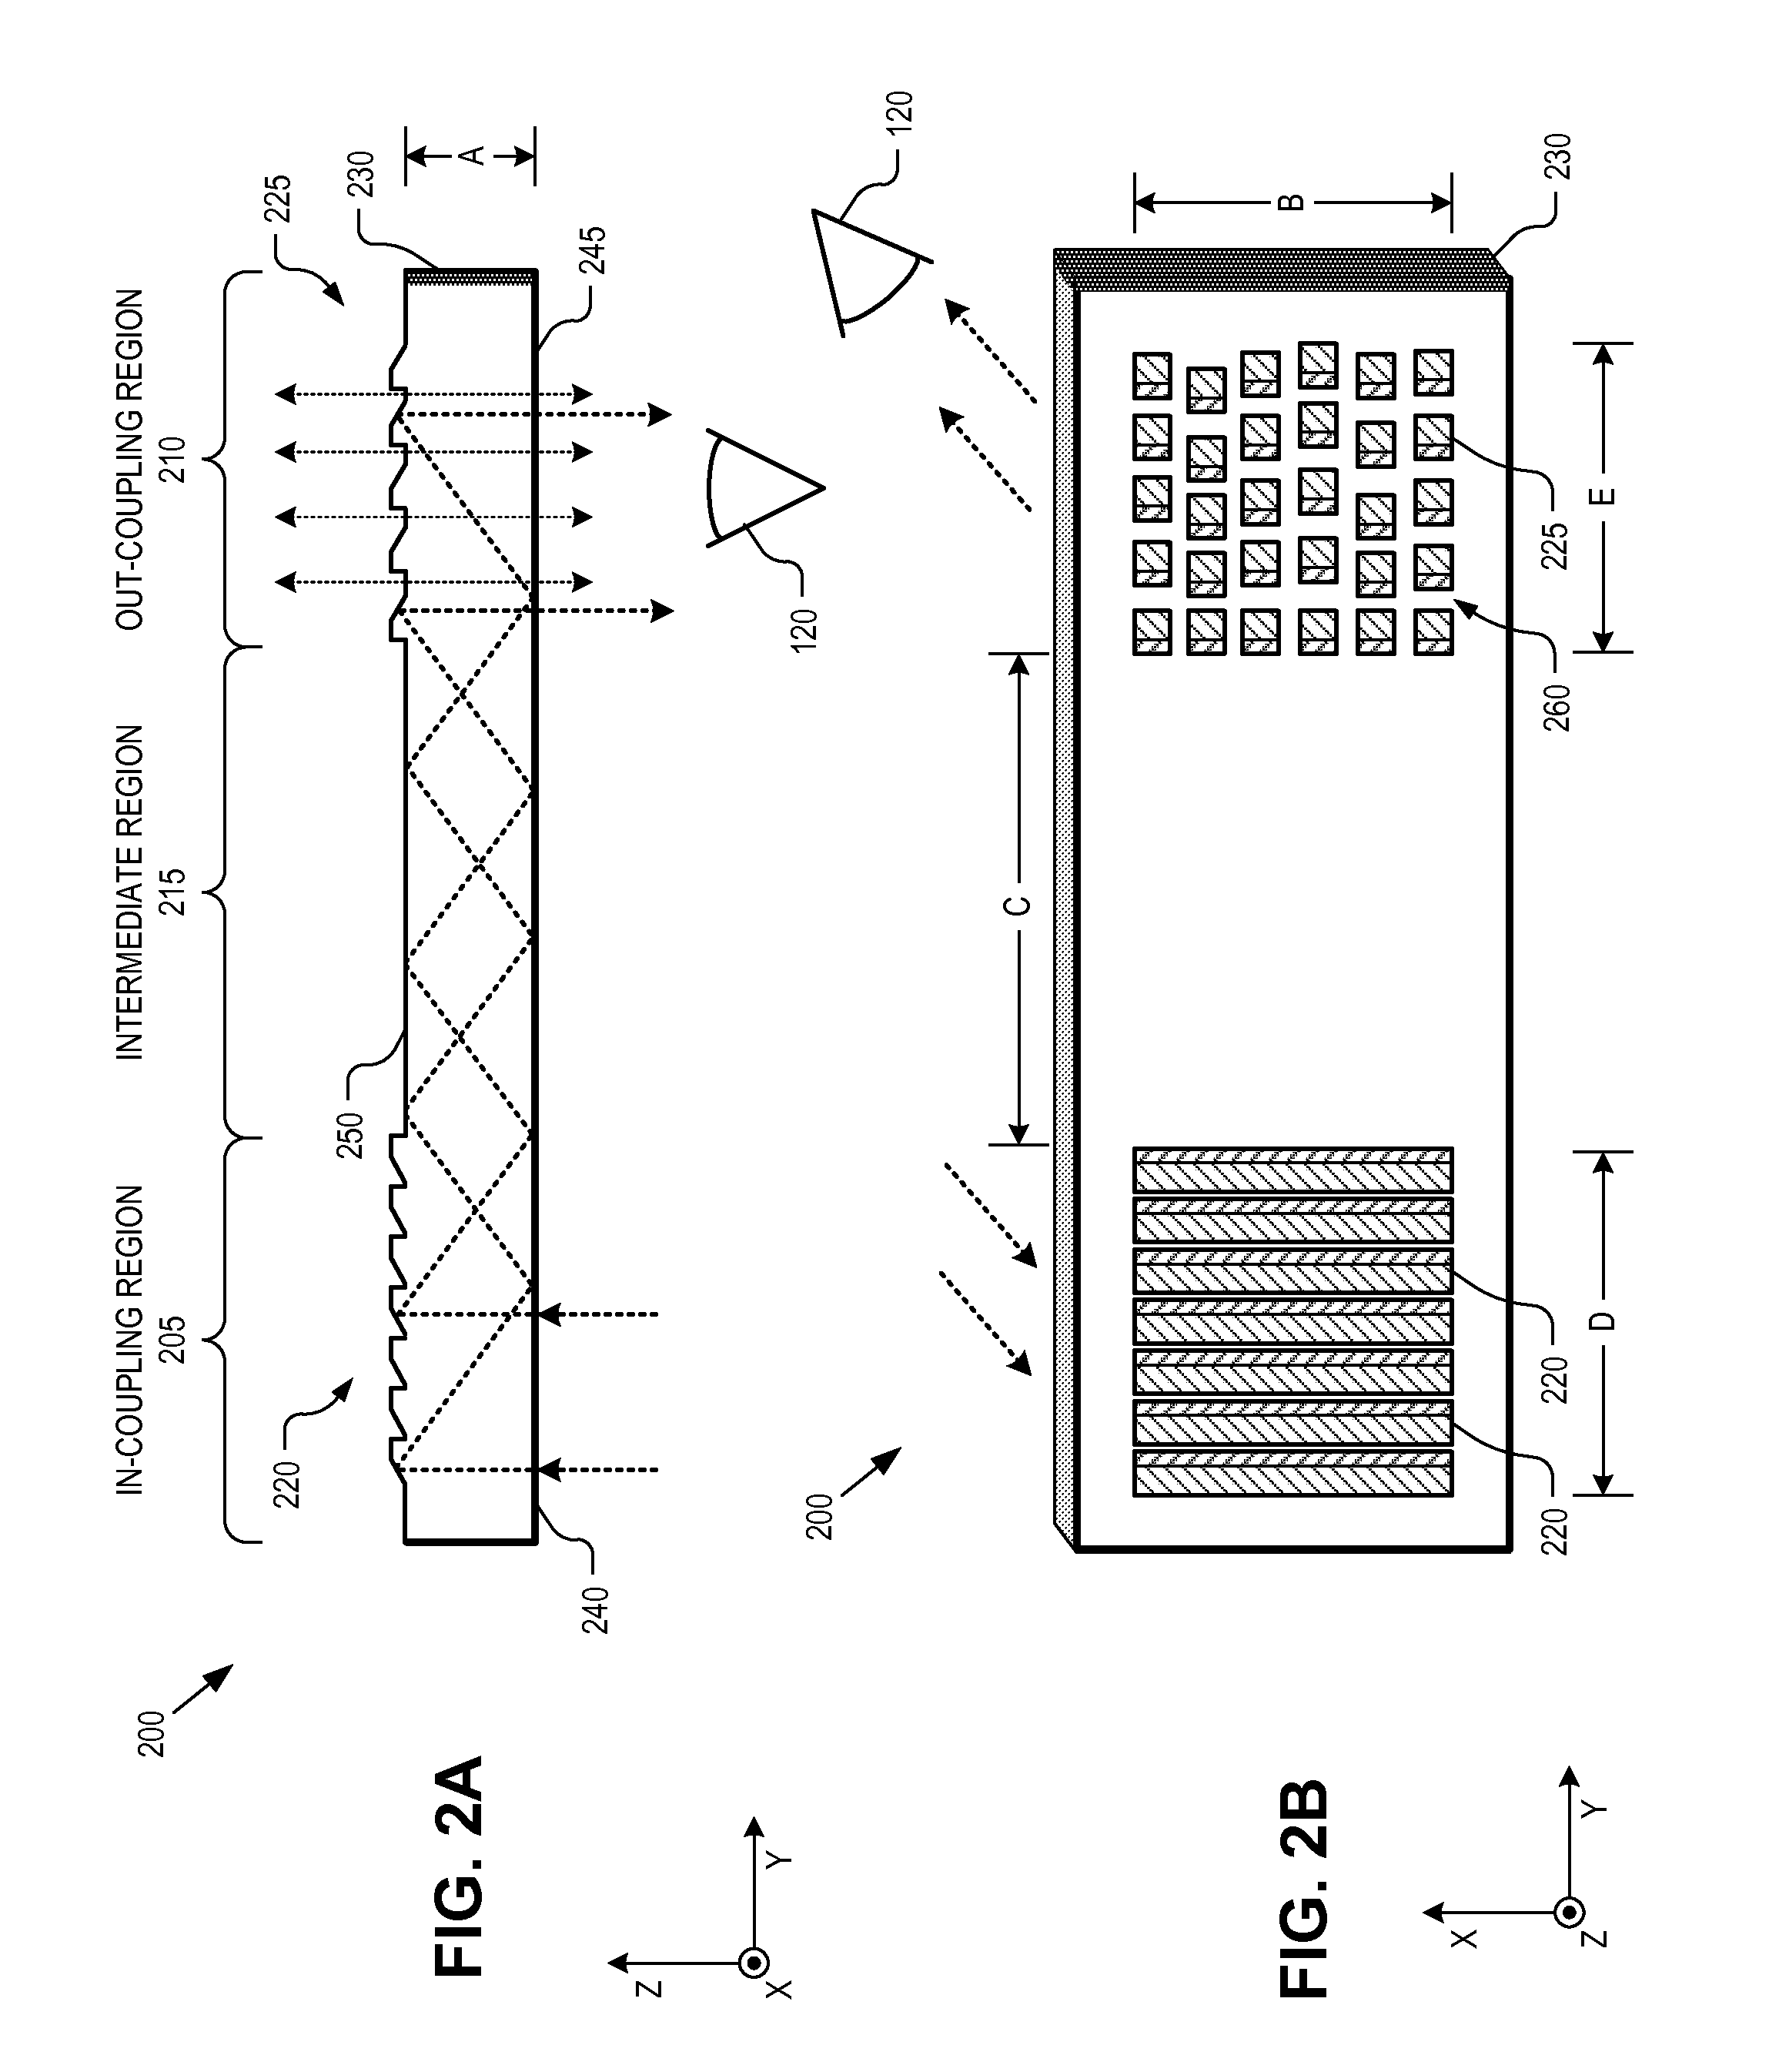 Image waveguide with mirror arrays